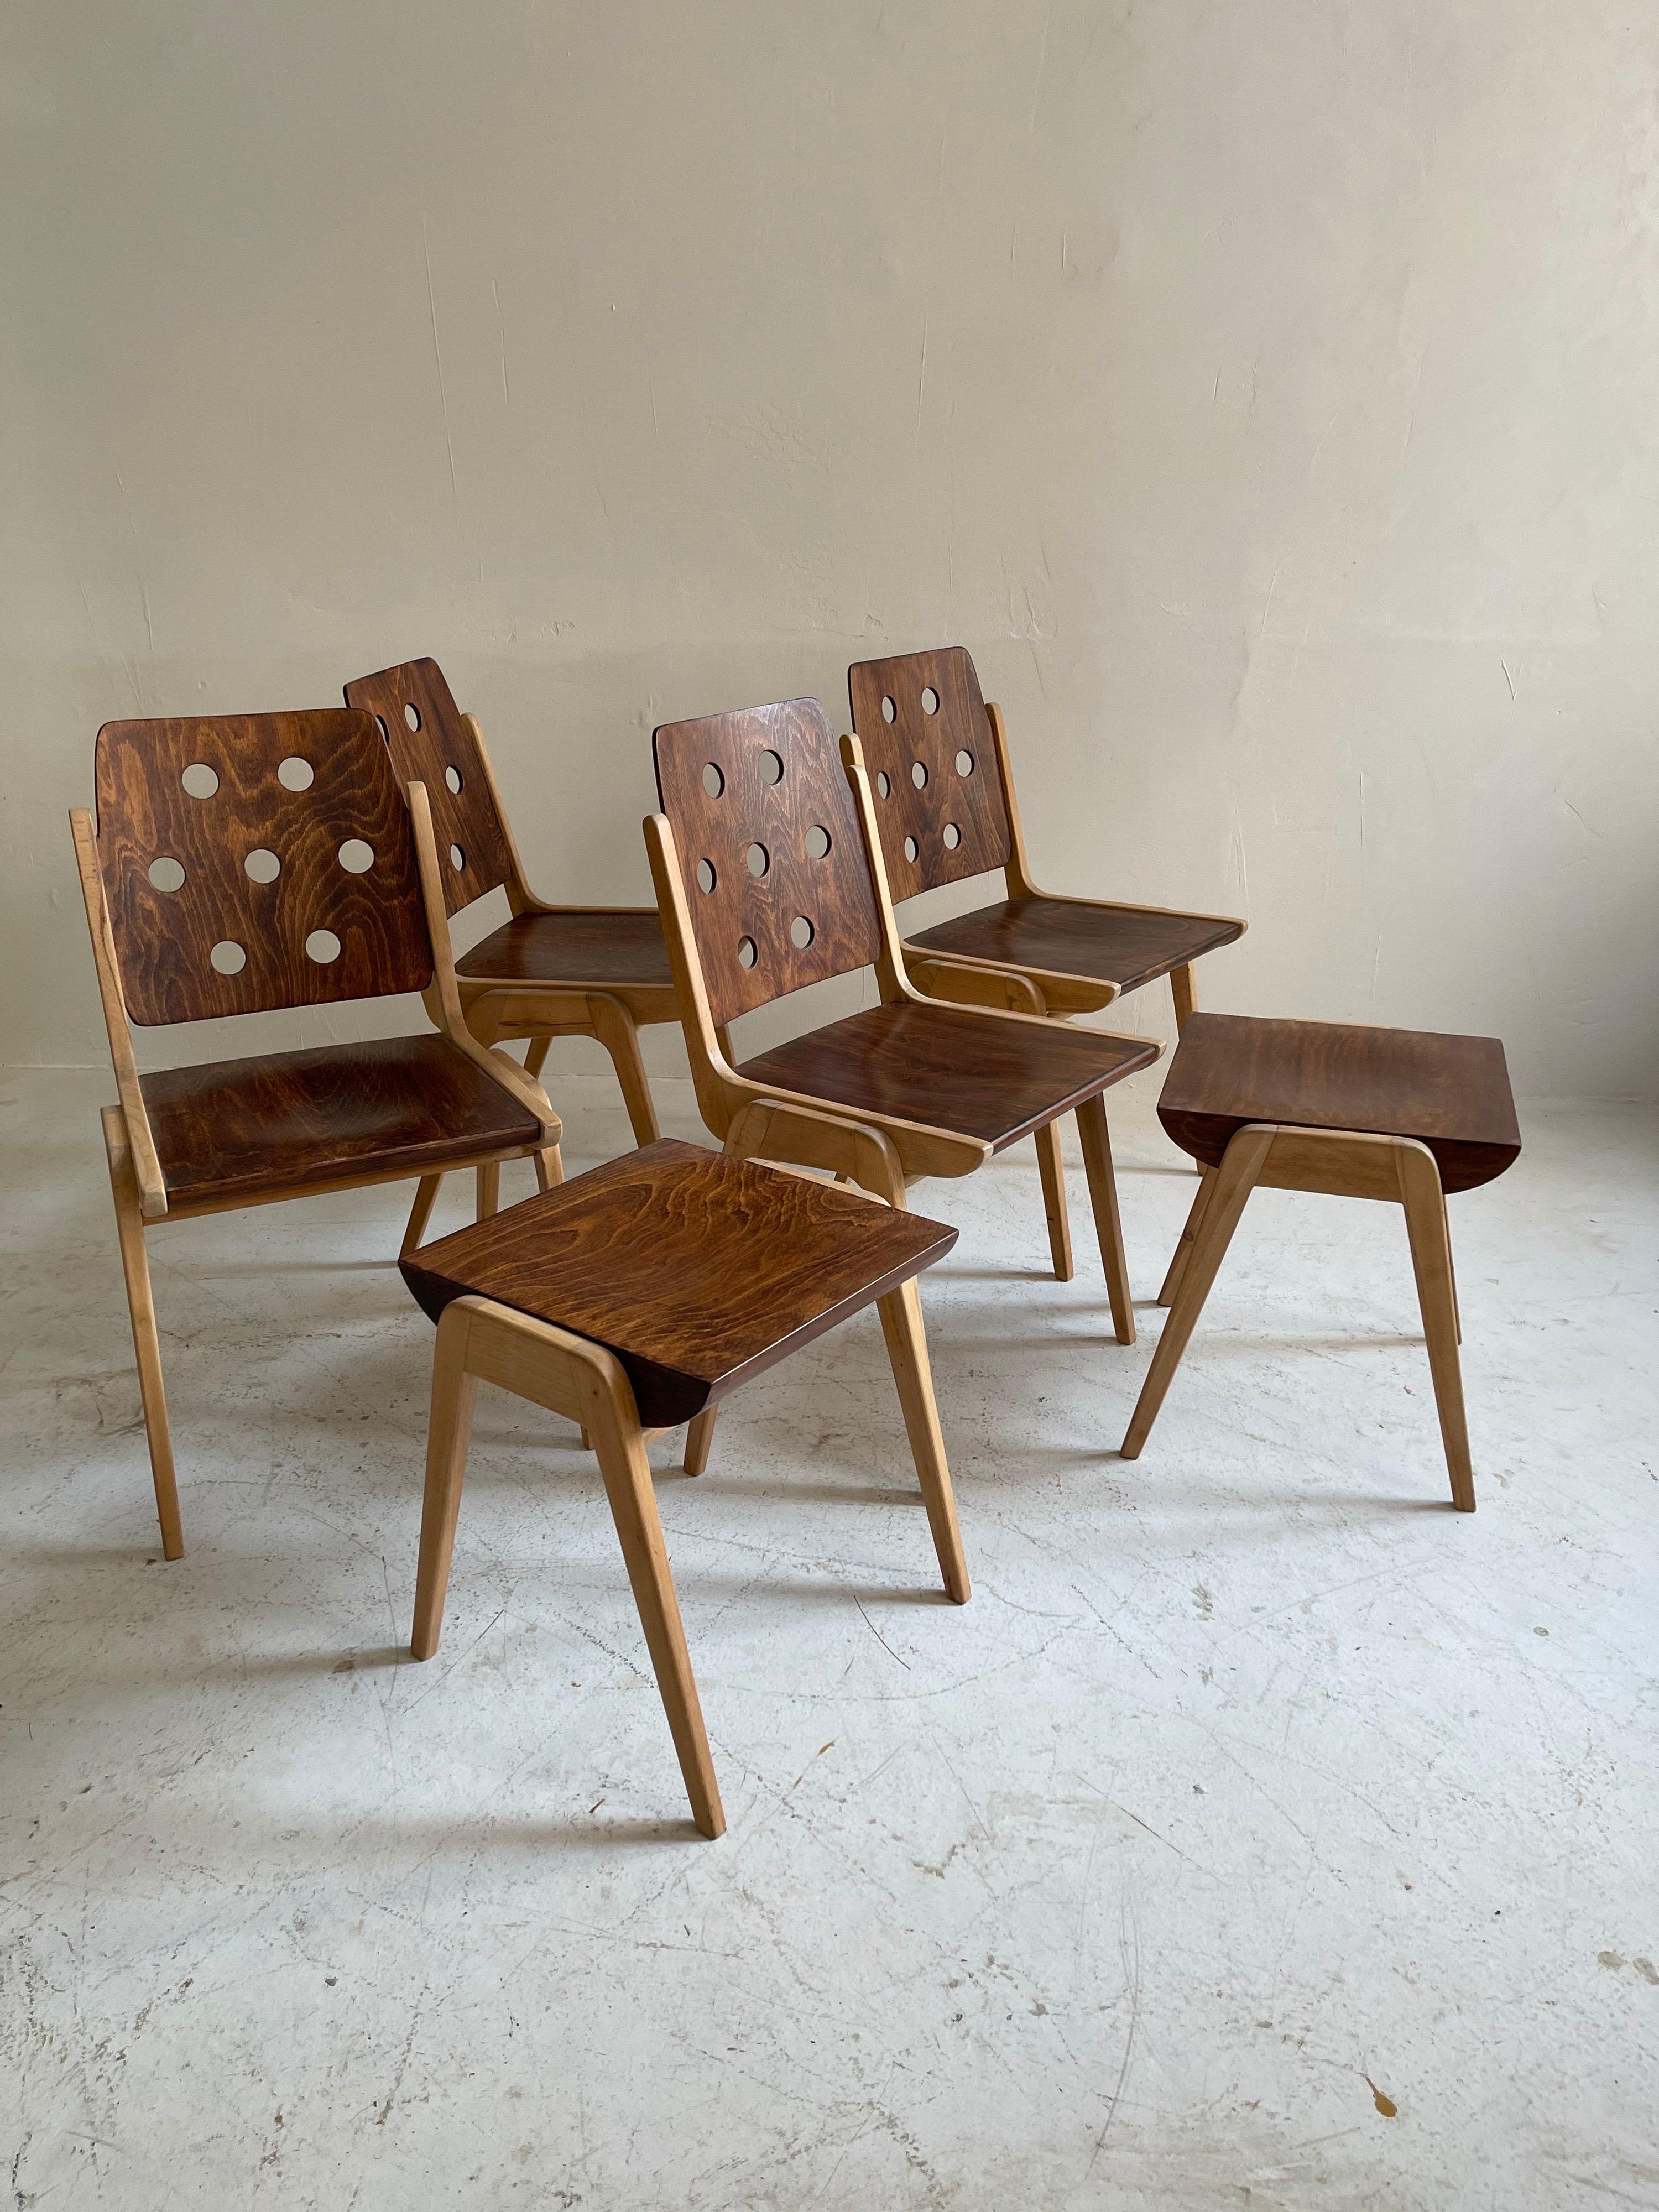 Austrian Franz Schuster Model 'Maestro' Dining Room Chairs & Stools, Austria, 1950s For Sale